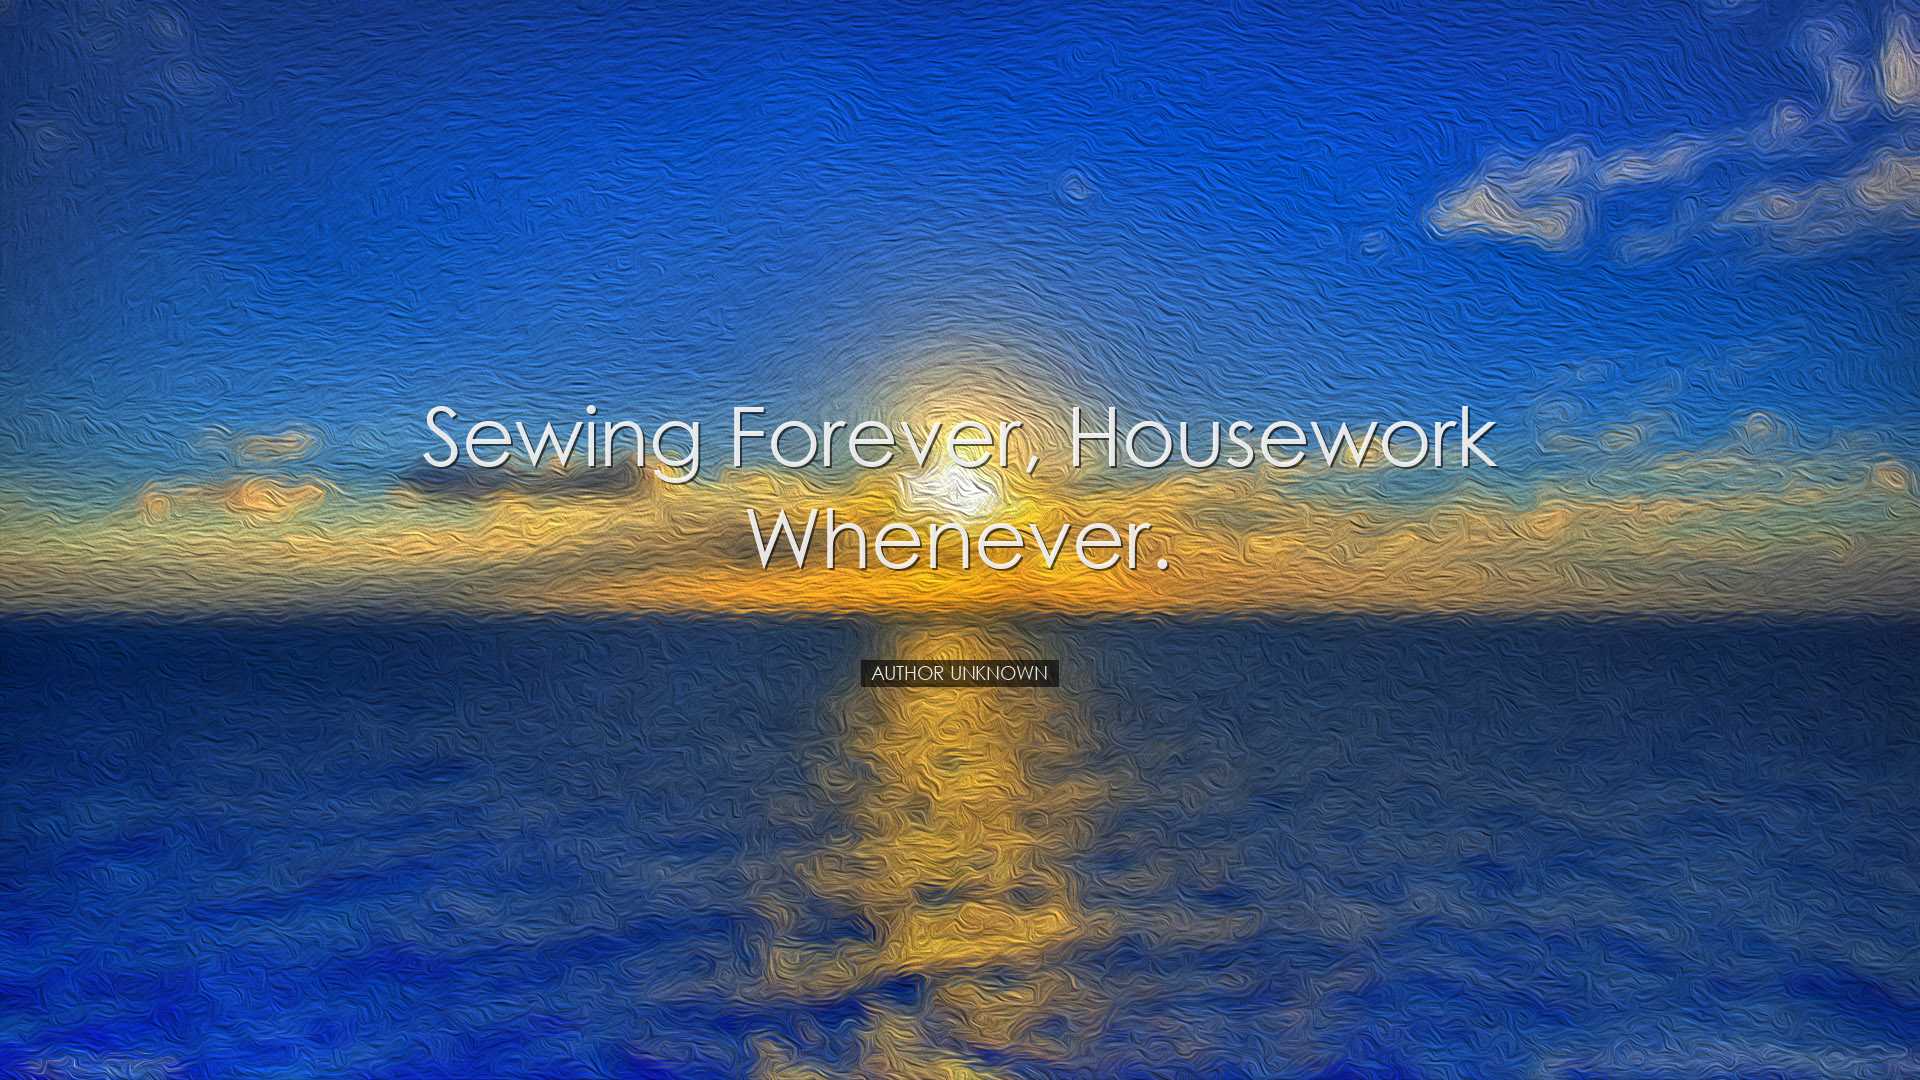 Sewing forever, housework whenever. - Author Unknown